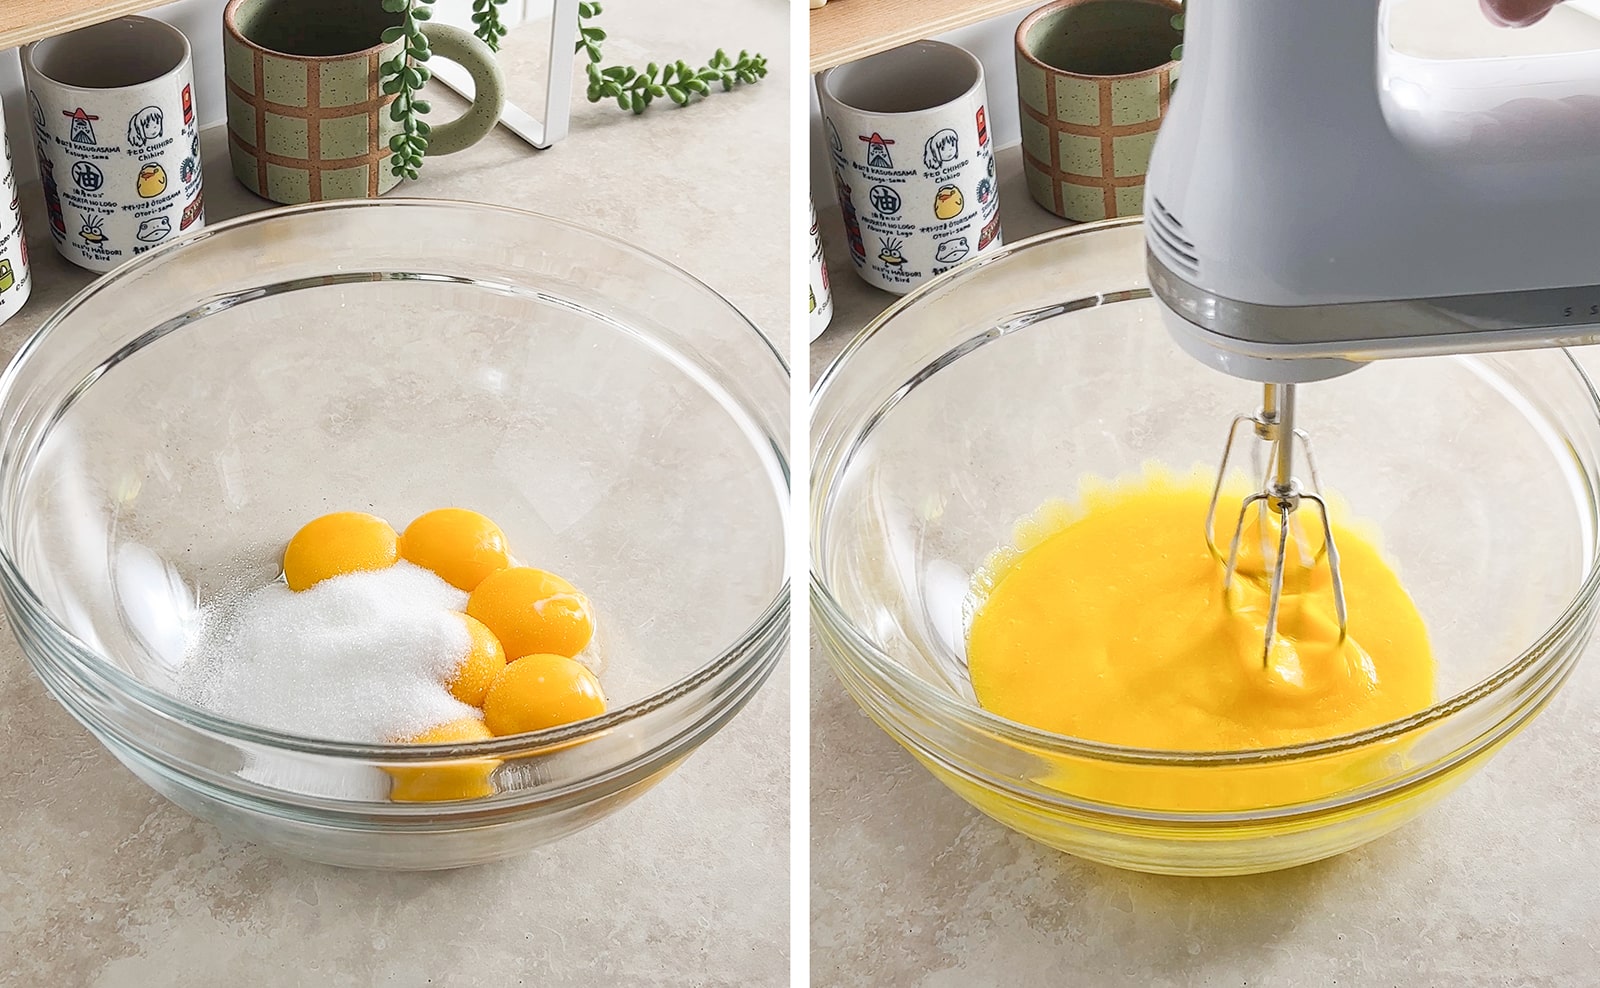 Left to right: egg yolks and sugar in mixing bowl, hand mixer beating egg yolk mixture in a bowl.